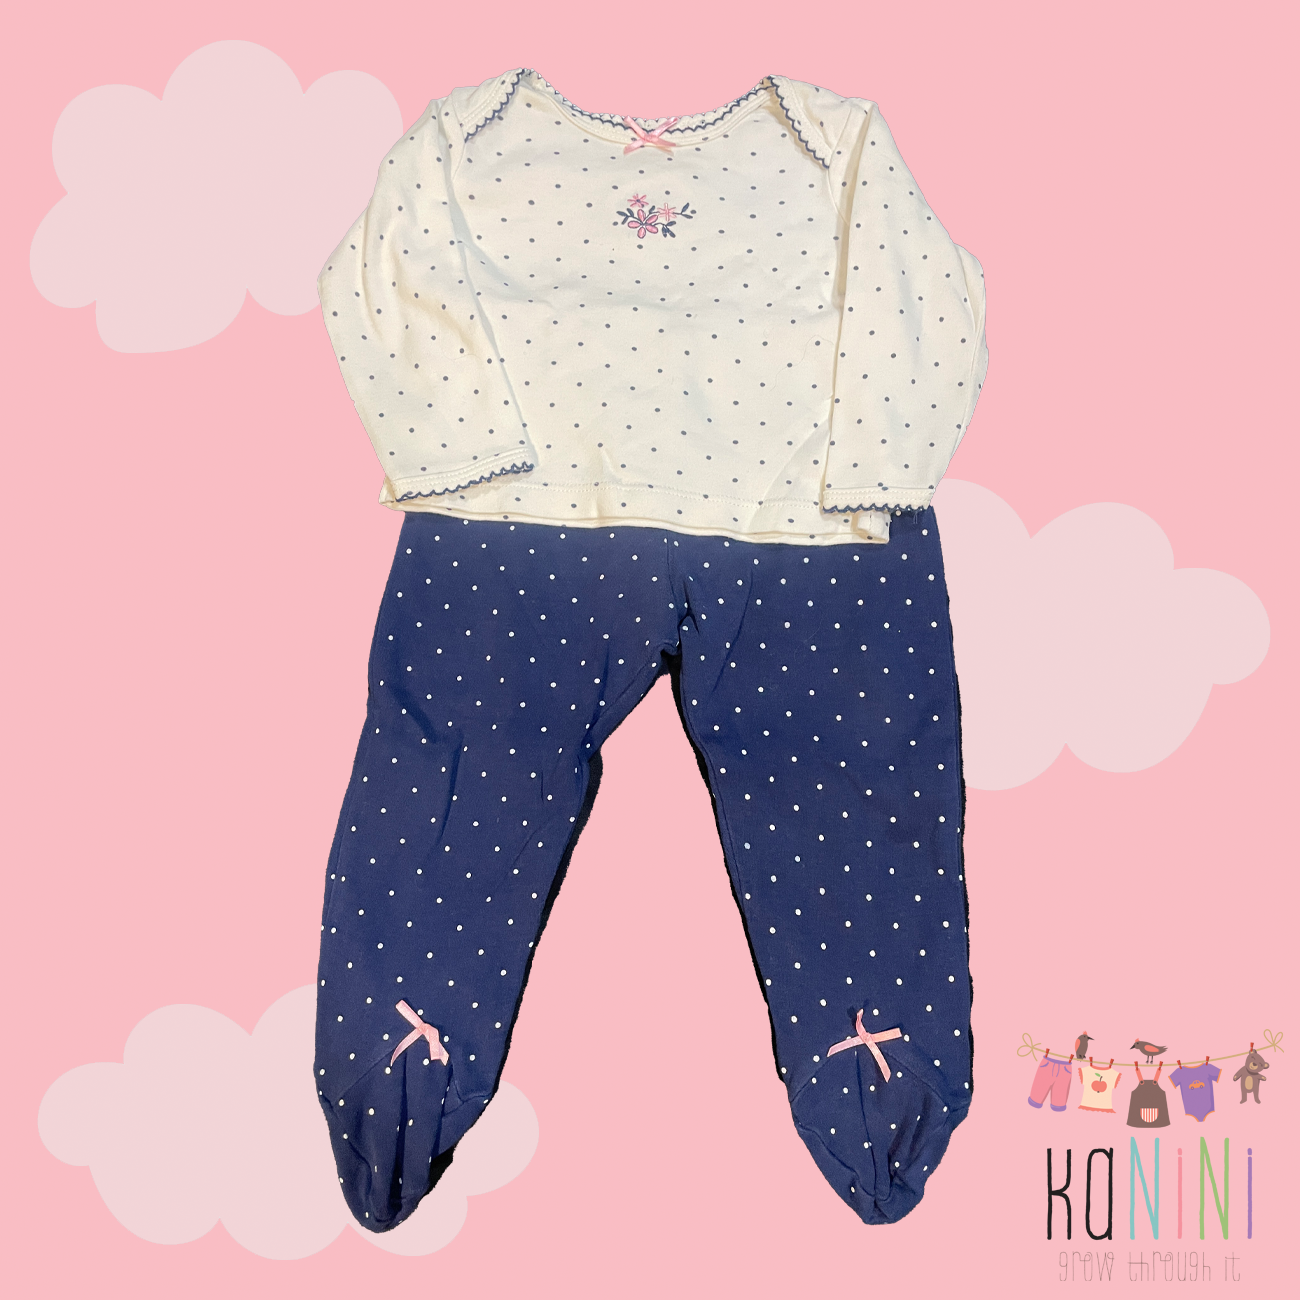 Featured image for “Little Me 9 Months Girls Navy Top & Leggings Set”